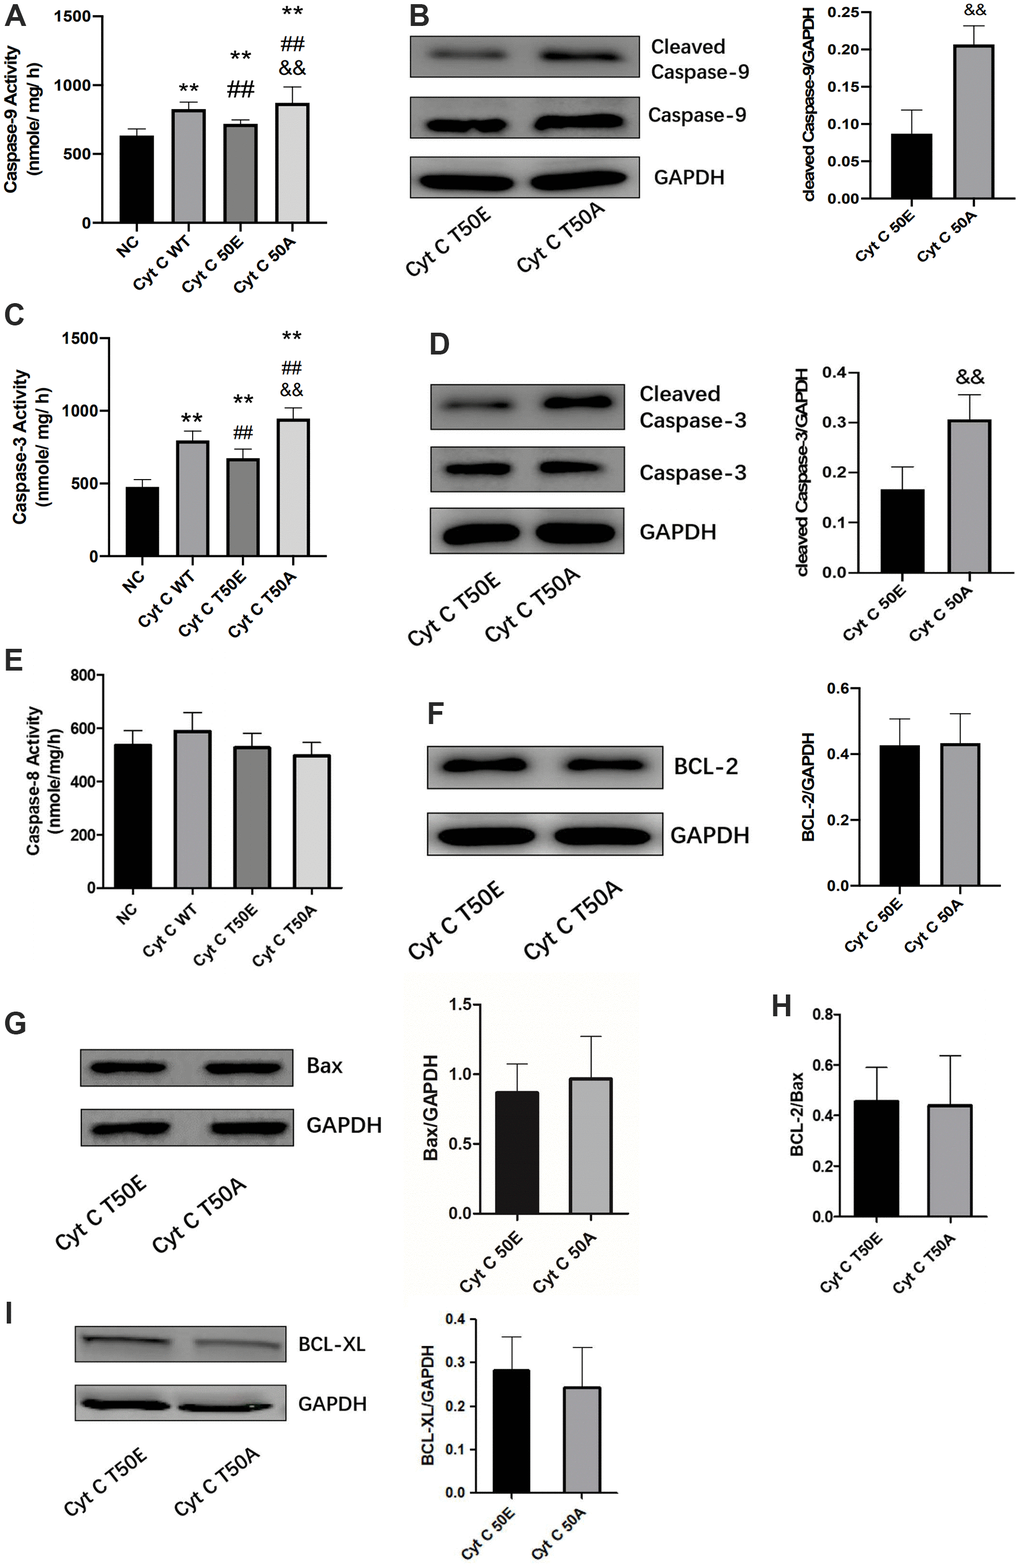 Effects of Cytc T-50 phosphorylation on caspase and Bcl-2 family activity. ELISA determination of caspase-9 (A), caspase-3 (C) and caspase-8 activity (E) in cardiomyocytes transfected with lentivirus. Representative Western blot and quantitative levels showing the expression of cleaved caspase-9 (B), cleaved caspase-3 (D), BCL-2 (F), Bax (G), BCL-2/Bax (H) and BCL-XL (I). n=3 in each group. ** P P P 